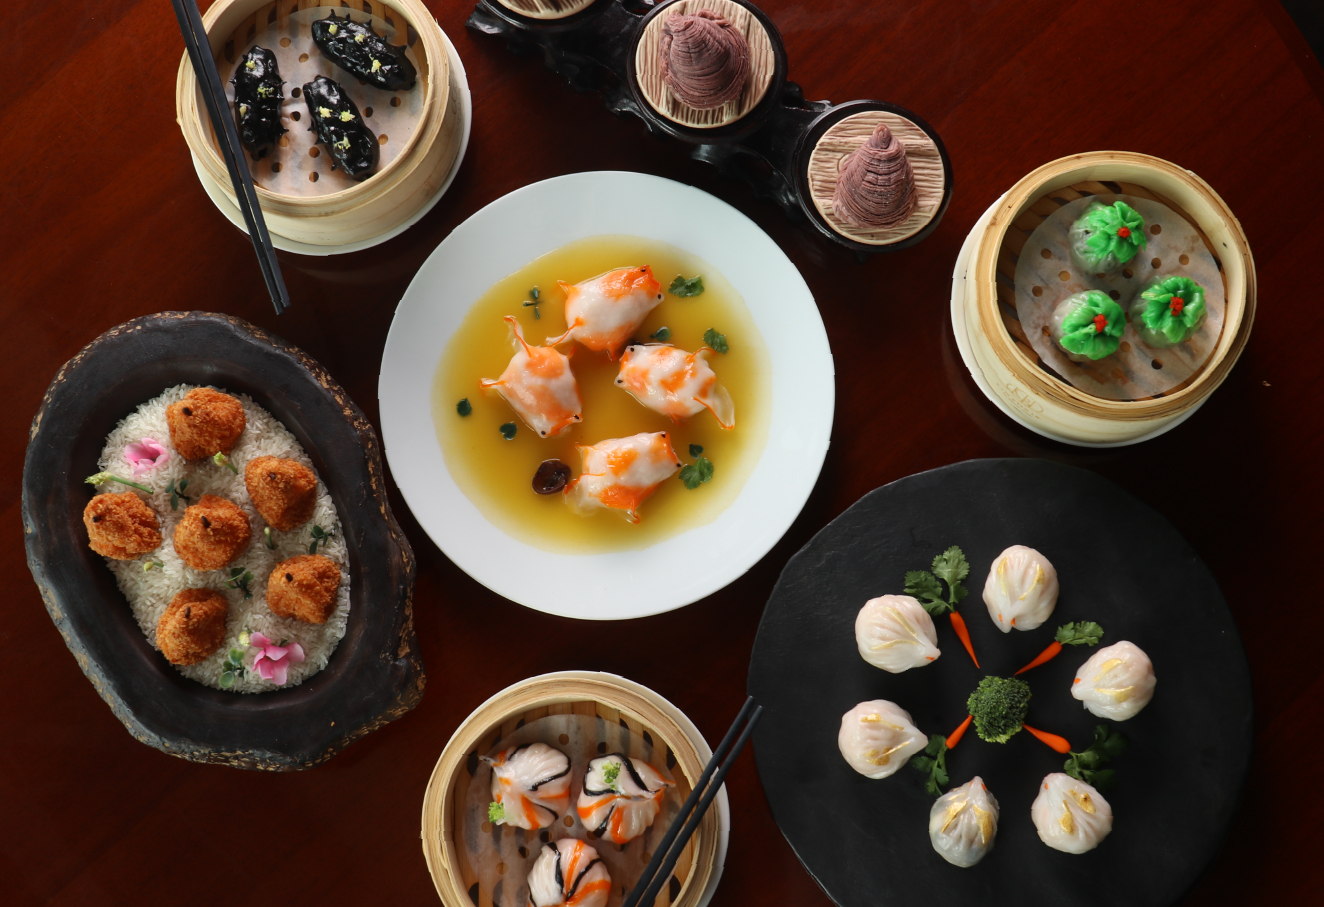 A variety of dumpling dishes in various shapes.